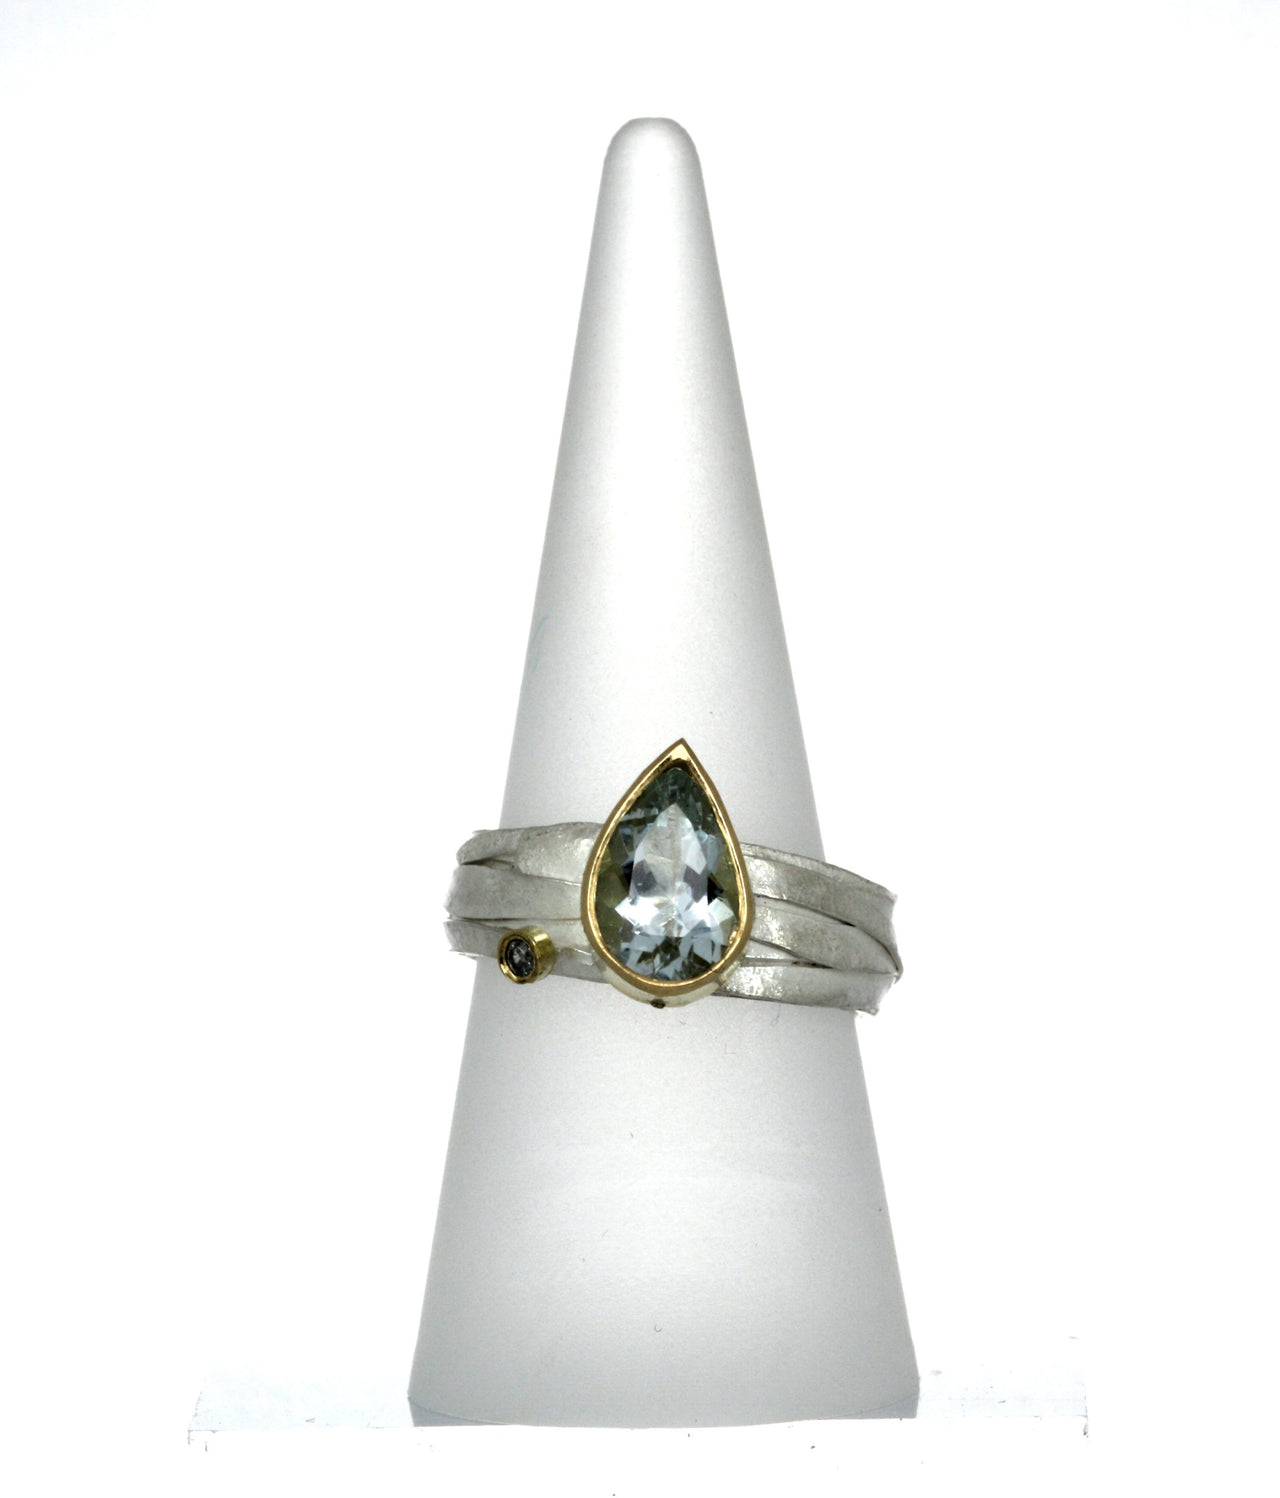 Silver wrap ring with aquamarine and diamond